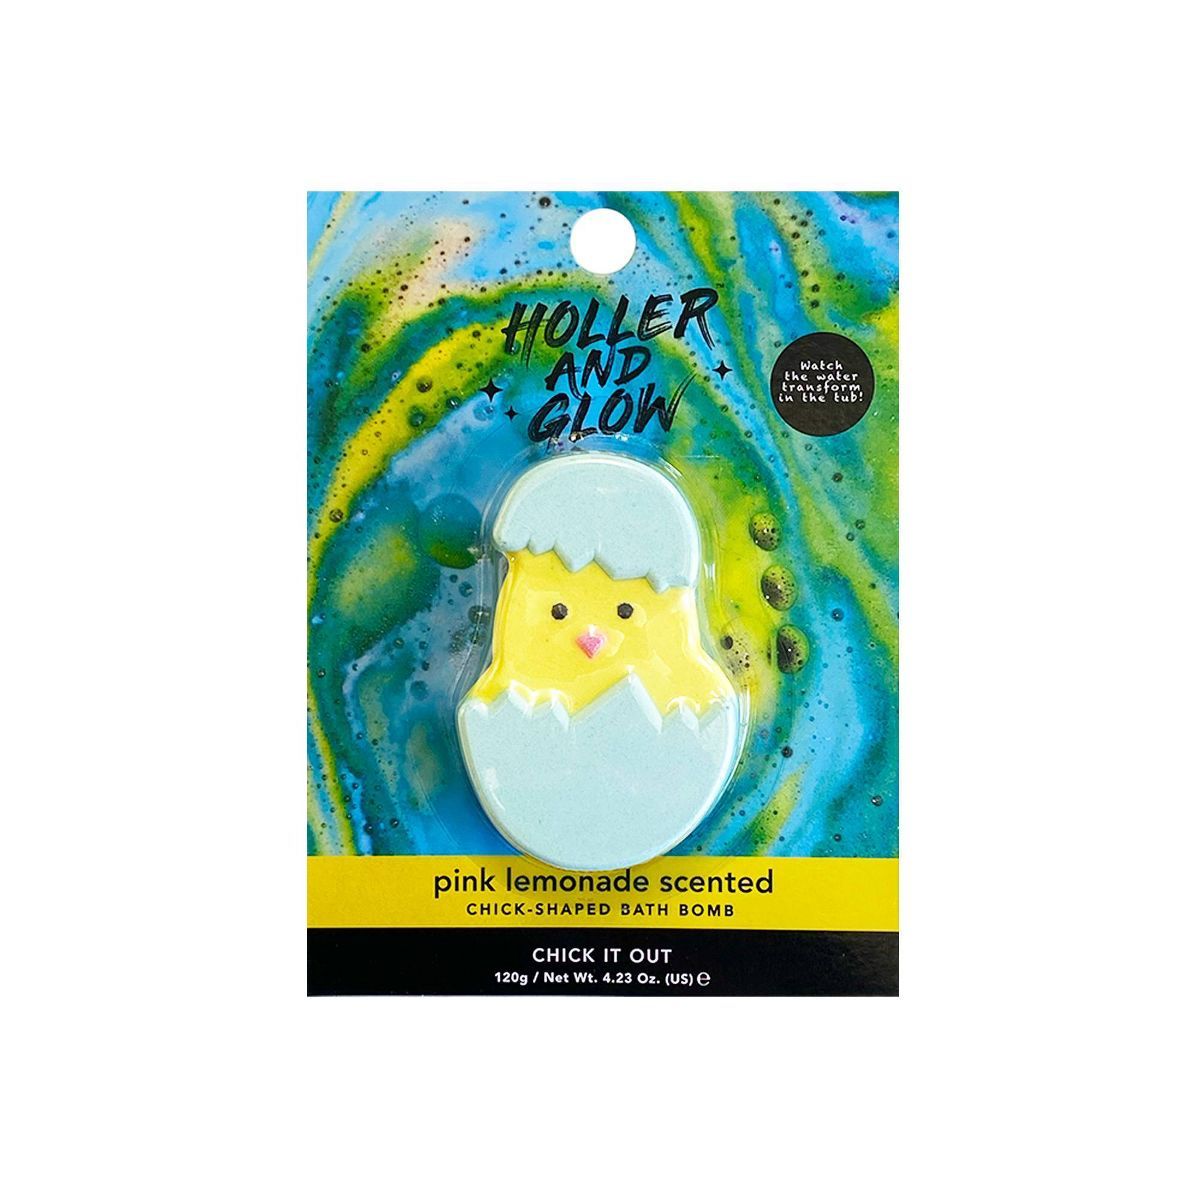 Holler and Glow Chick 'Chick It Out' Bath Bomb - 4.23oz | Target